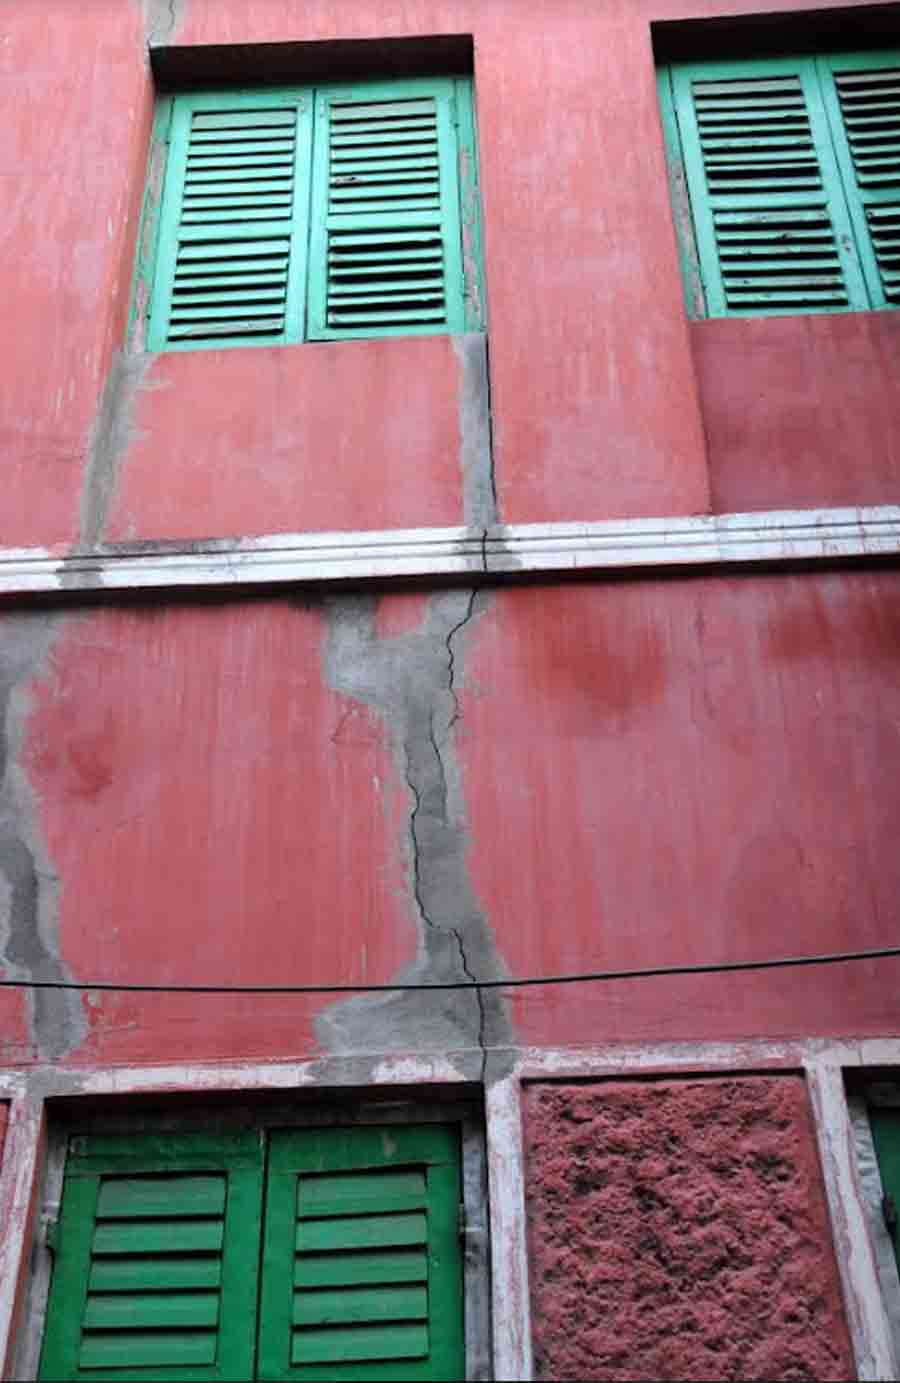 HOME & HEARTH AT RISK: Cracks appeared in multiple buildings at Durga Pituri Lane in Bowbazar, close to the route of the ongoing East-West Metro project, on Wednesday, May 11 night. Kolkata Metro Rail Corporation had to evacuate 30 families from their houses. 